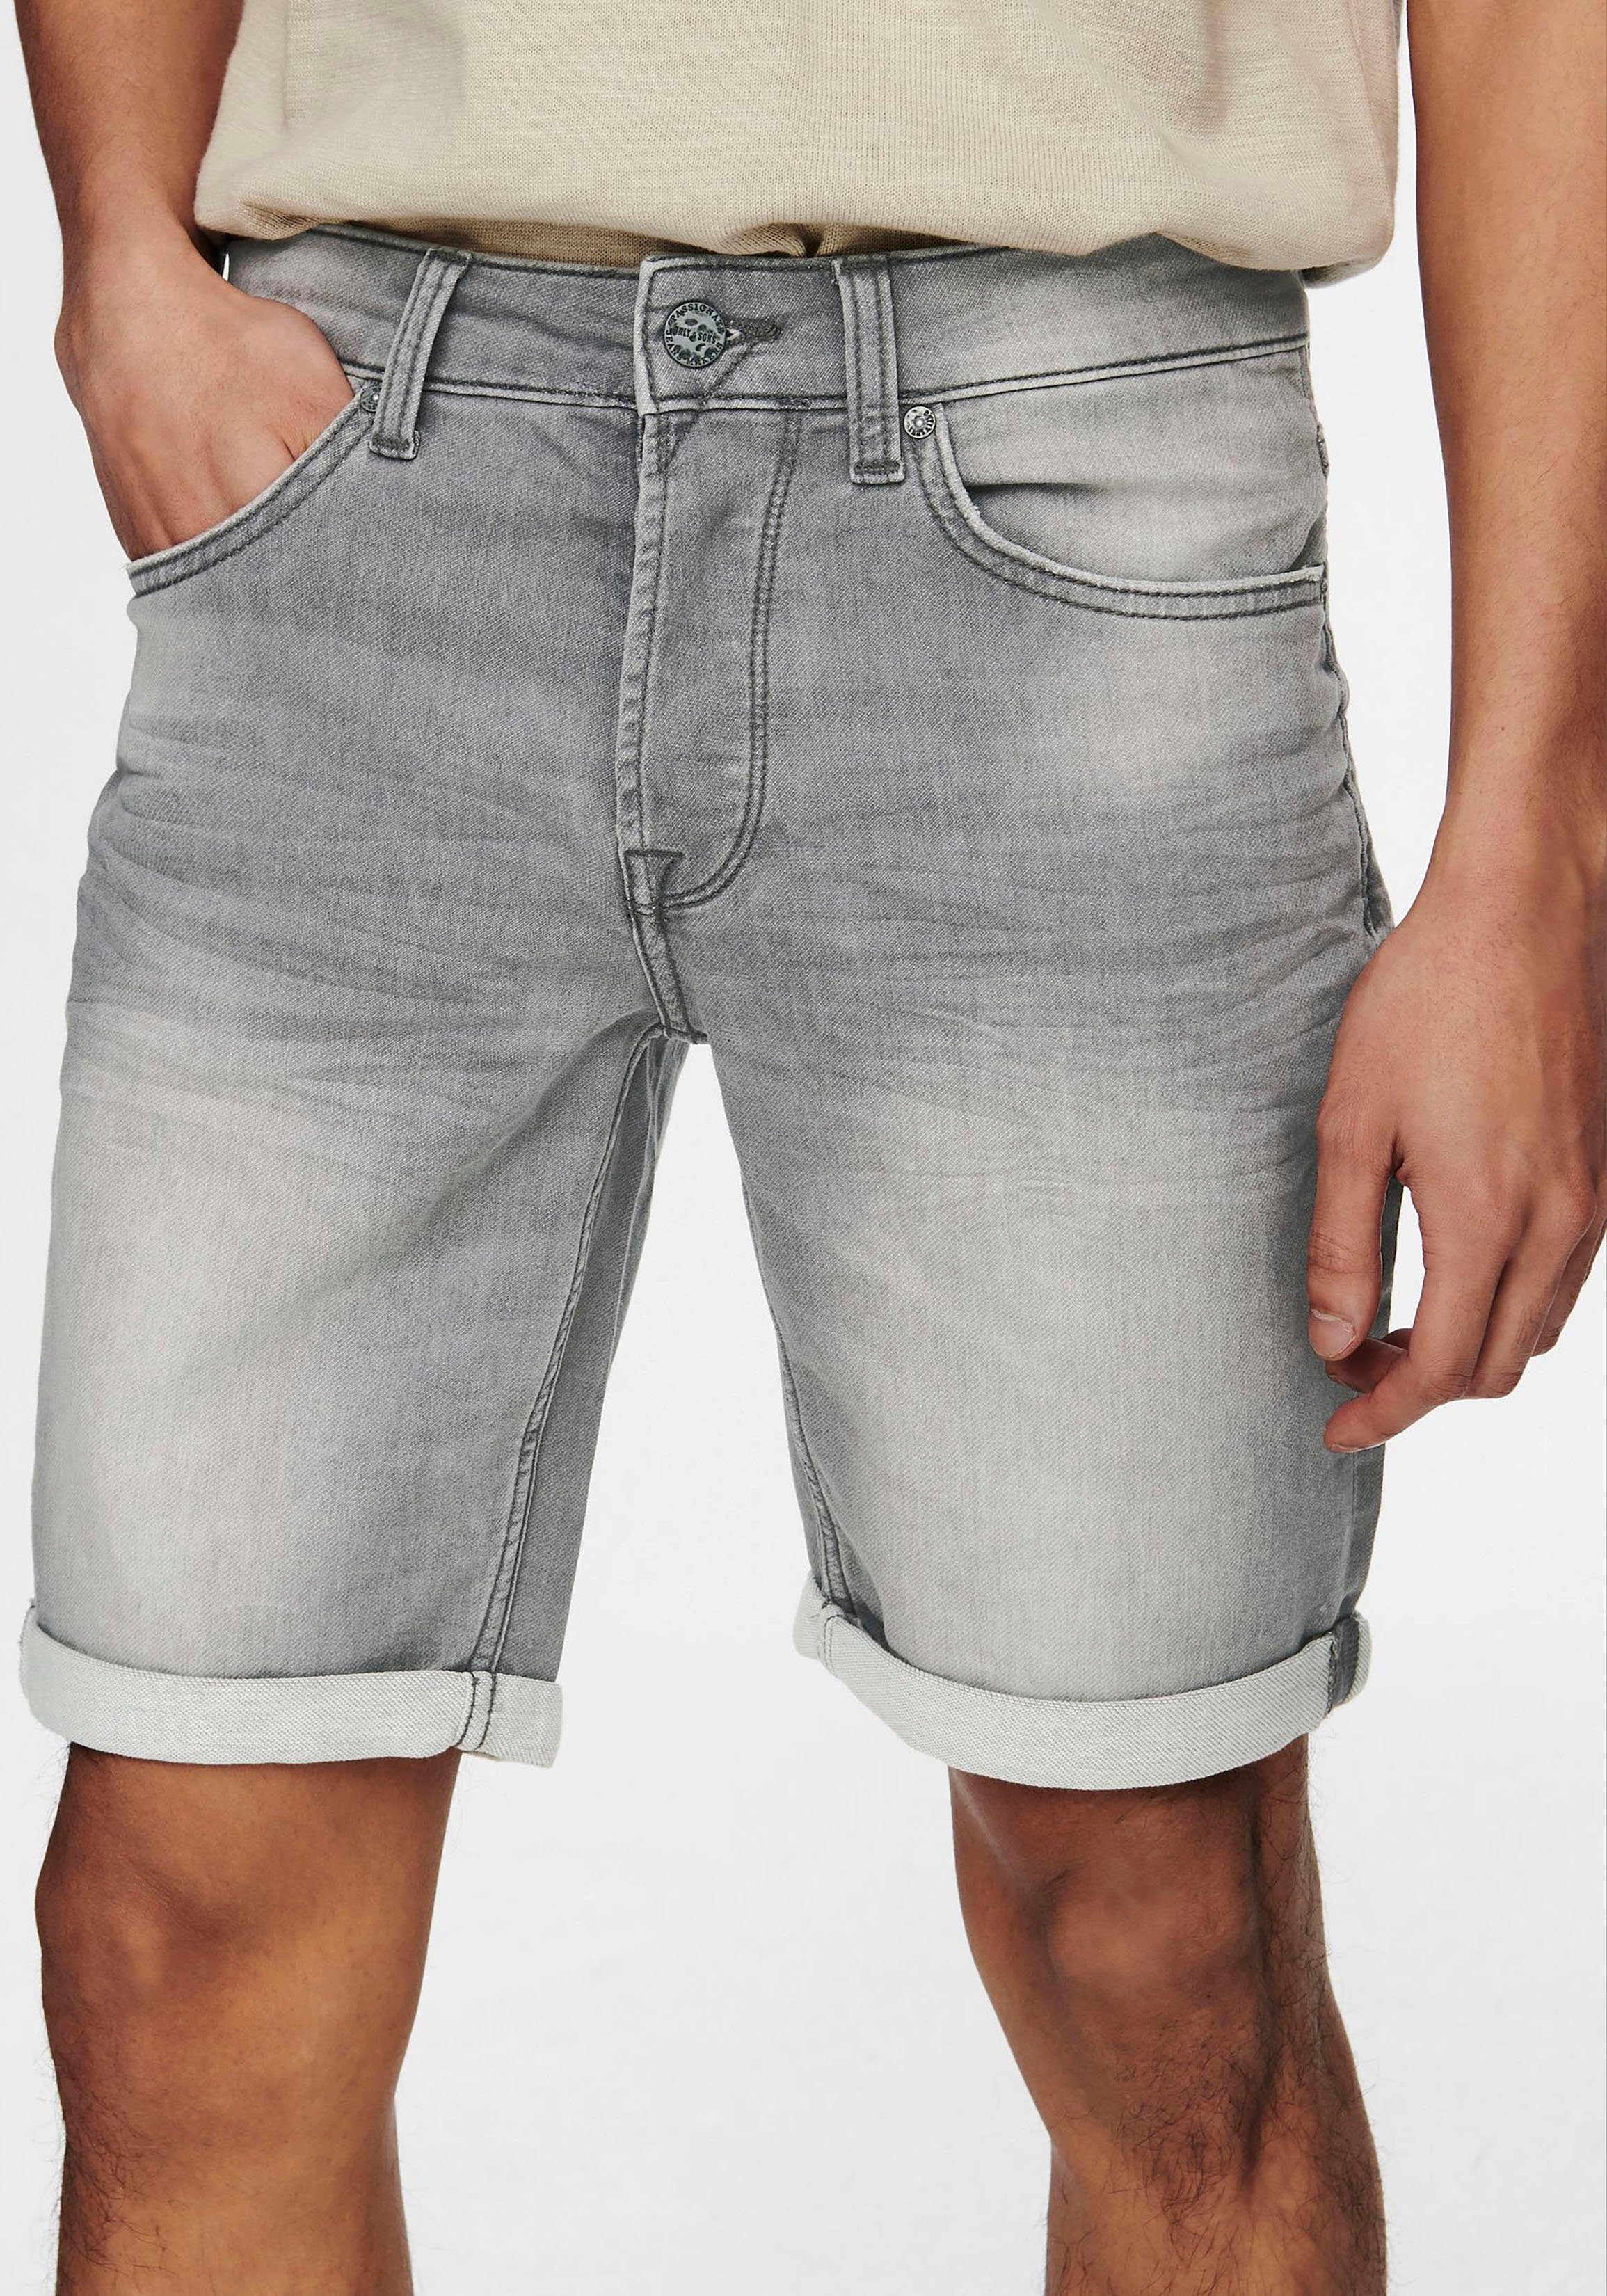 ONLY & SONS NOOS ONSPLY Denim Jeansshorts DNM LIGHT Grey 5189 SHORTS BLUE